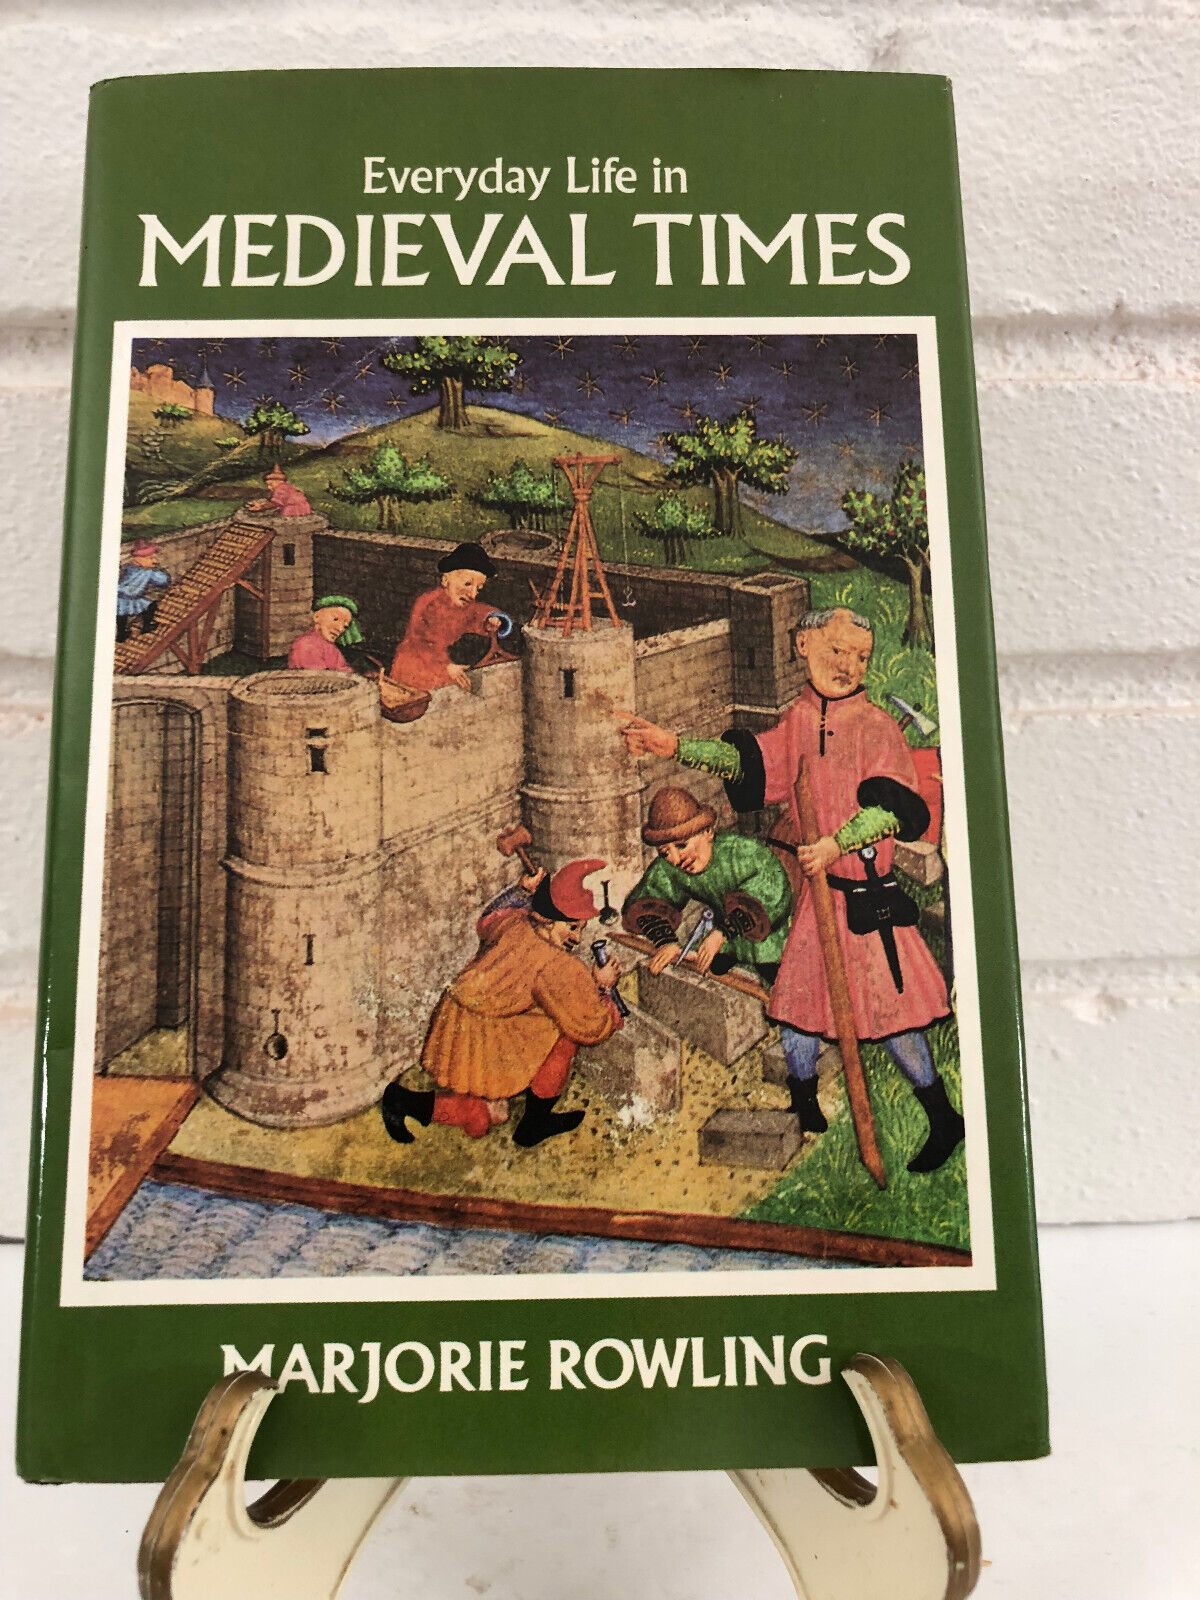 Primary image for Everyday Life in Medieval Times by Marjorie Rowling (1987, Hardcover, Reprint)